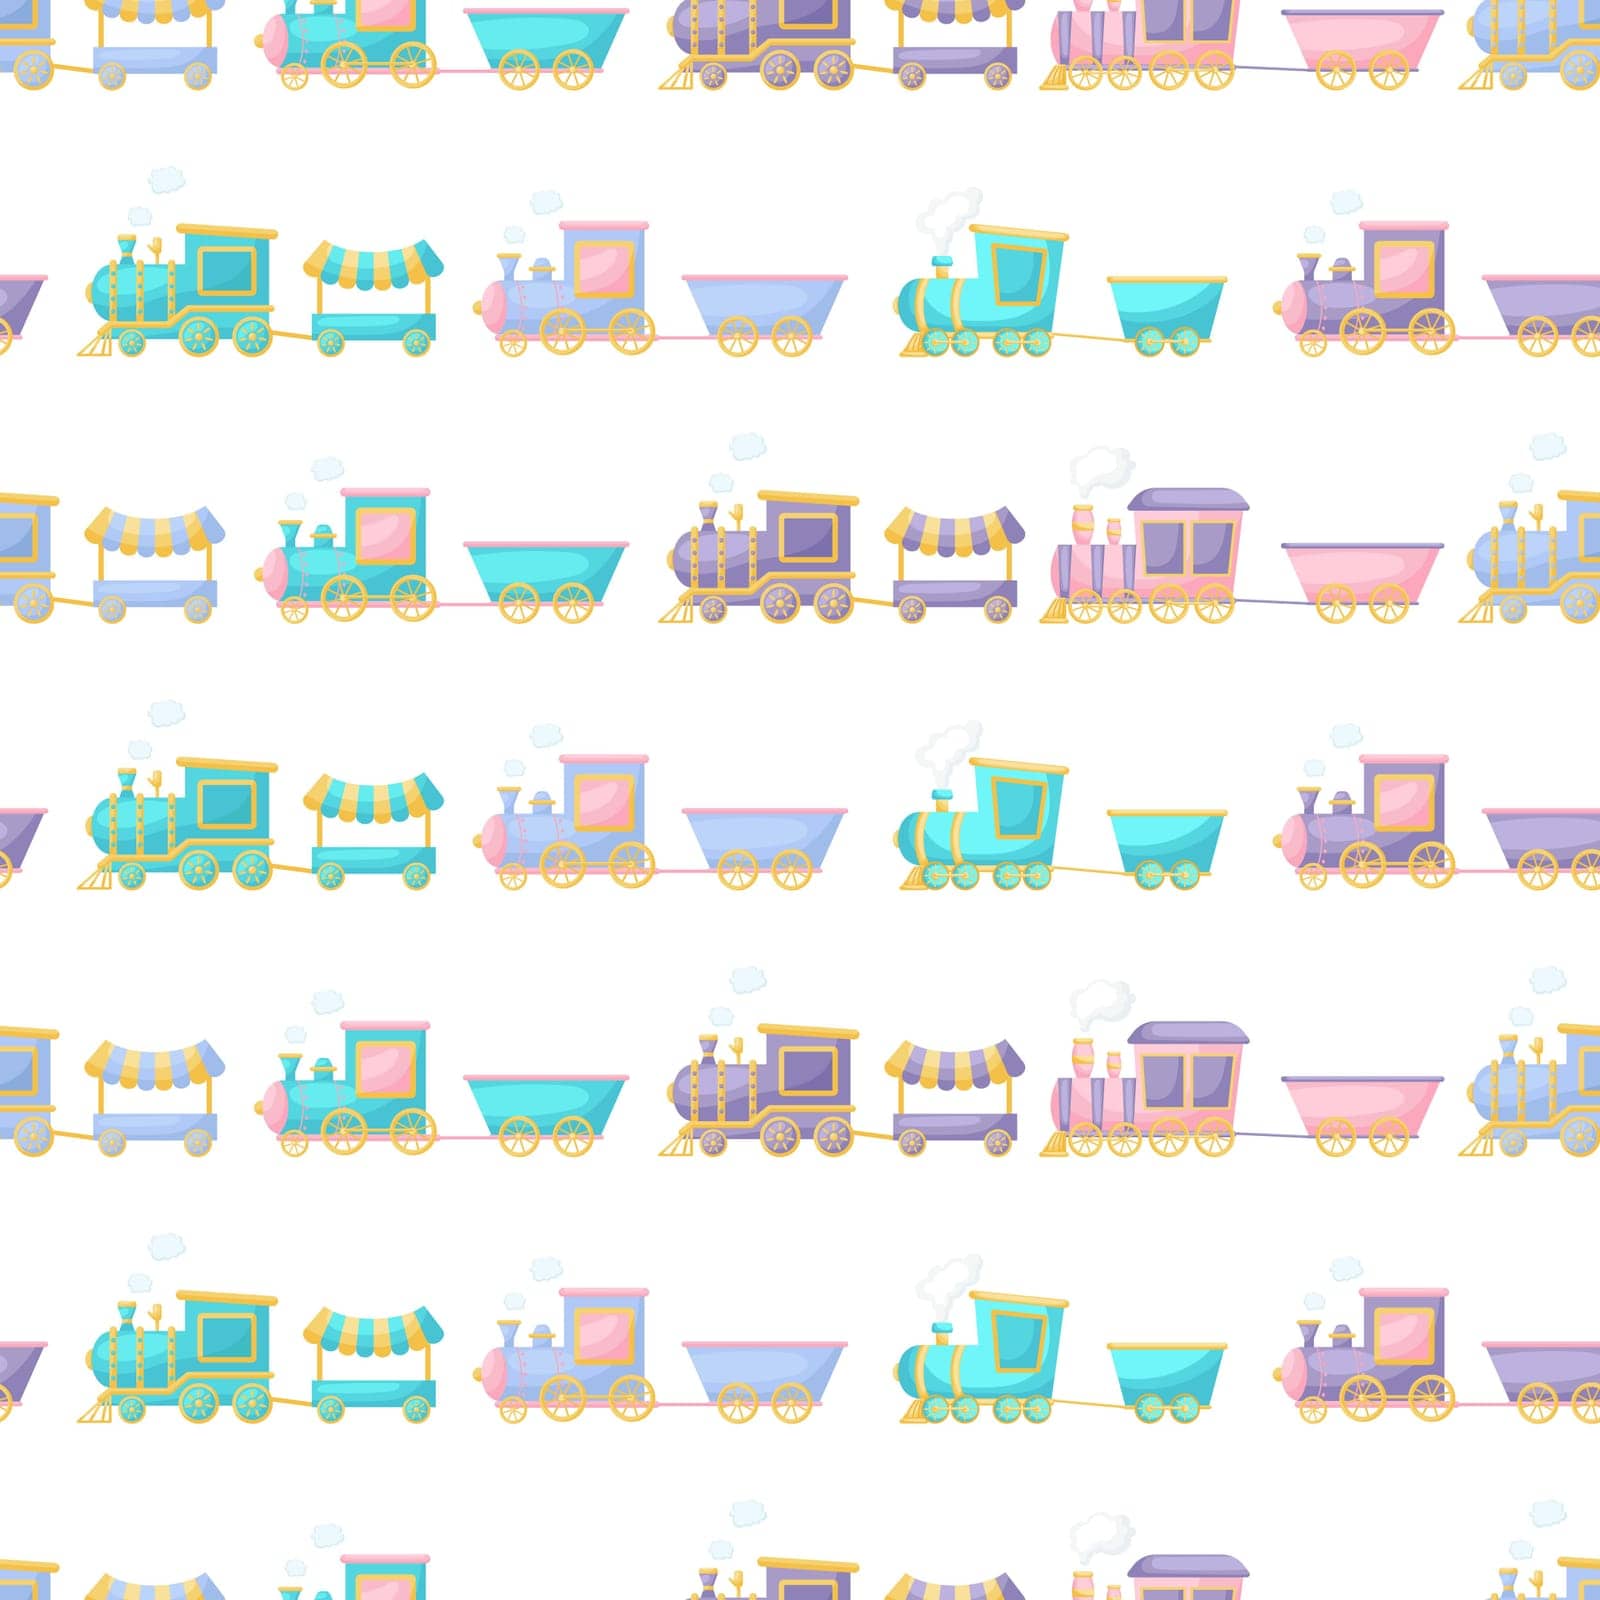 Cute children's seamless pattern with trains. Creative kids texture for fabric, wrapping, textile, wallpaper, apparel. Vector illustration by Melnyk